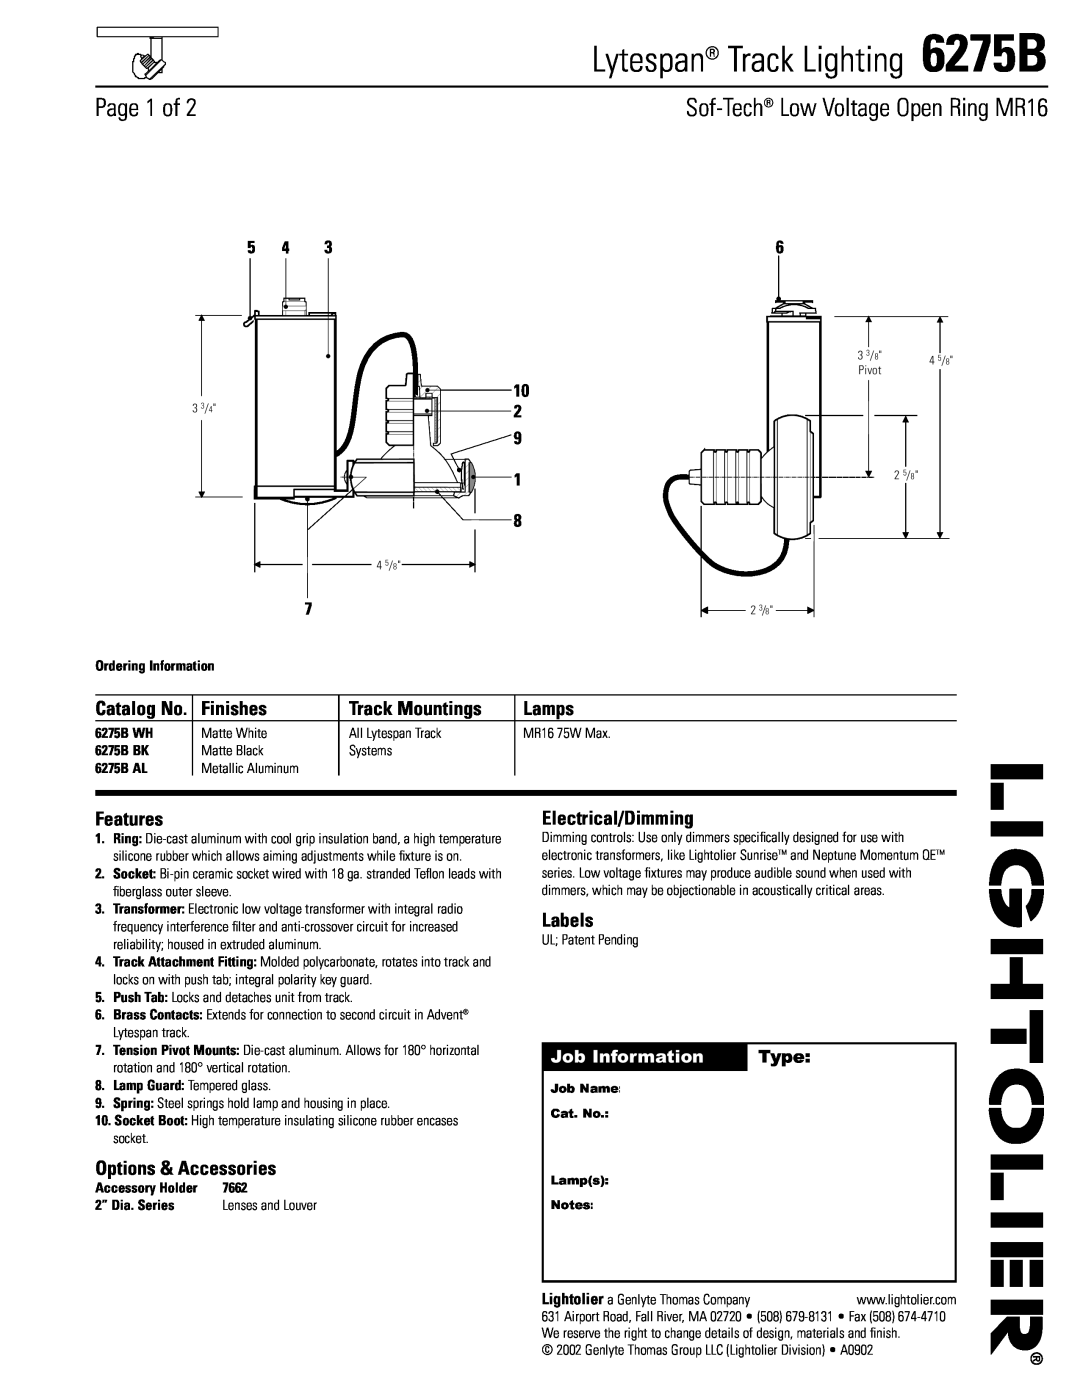 Lightolier manual Lytespan Track Lighting 6275B, Page 1 of, Sof-Tech Low Voltage Open Ring MR16, Finishes, Lamps, Type 